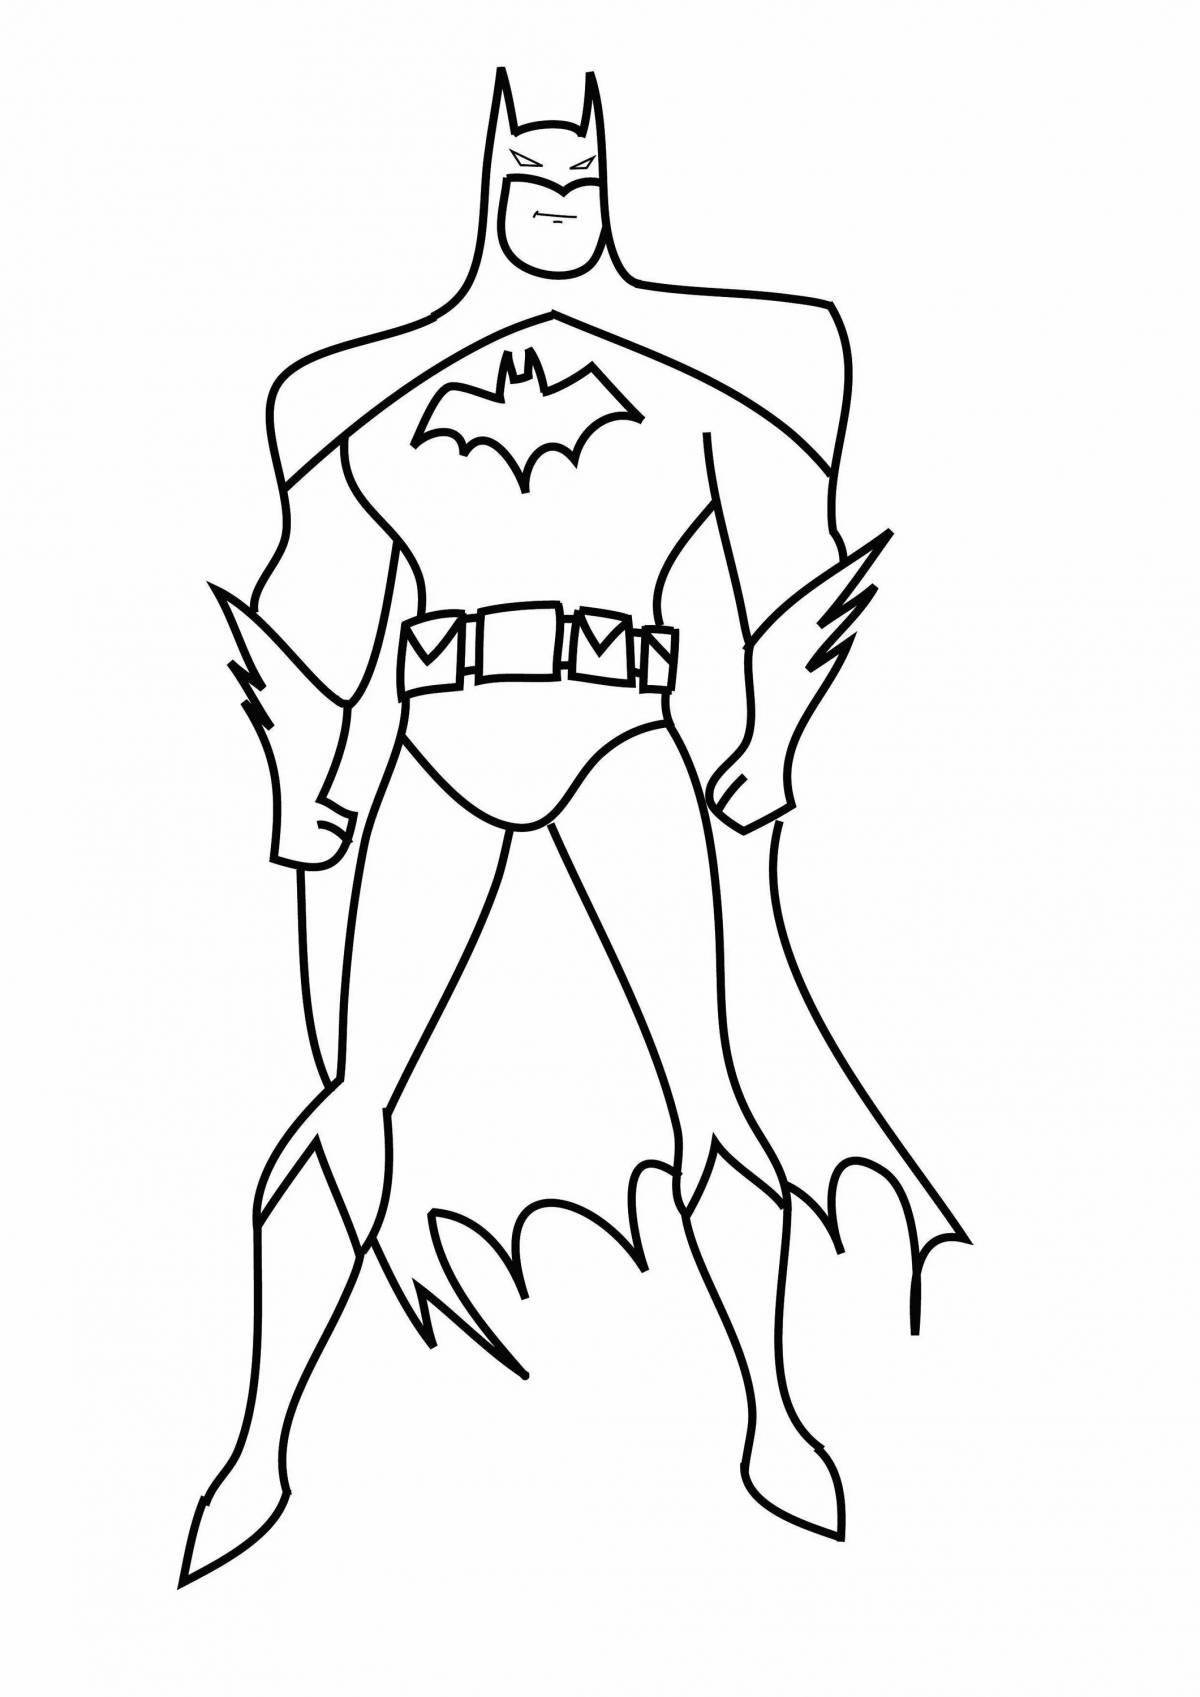 Outstanding superheroes coloring pages for 6-7 year olds